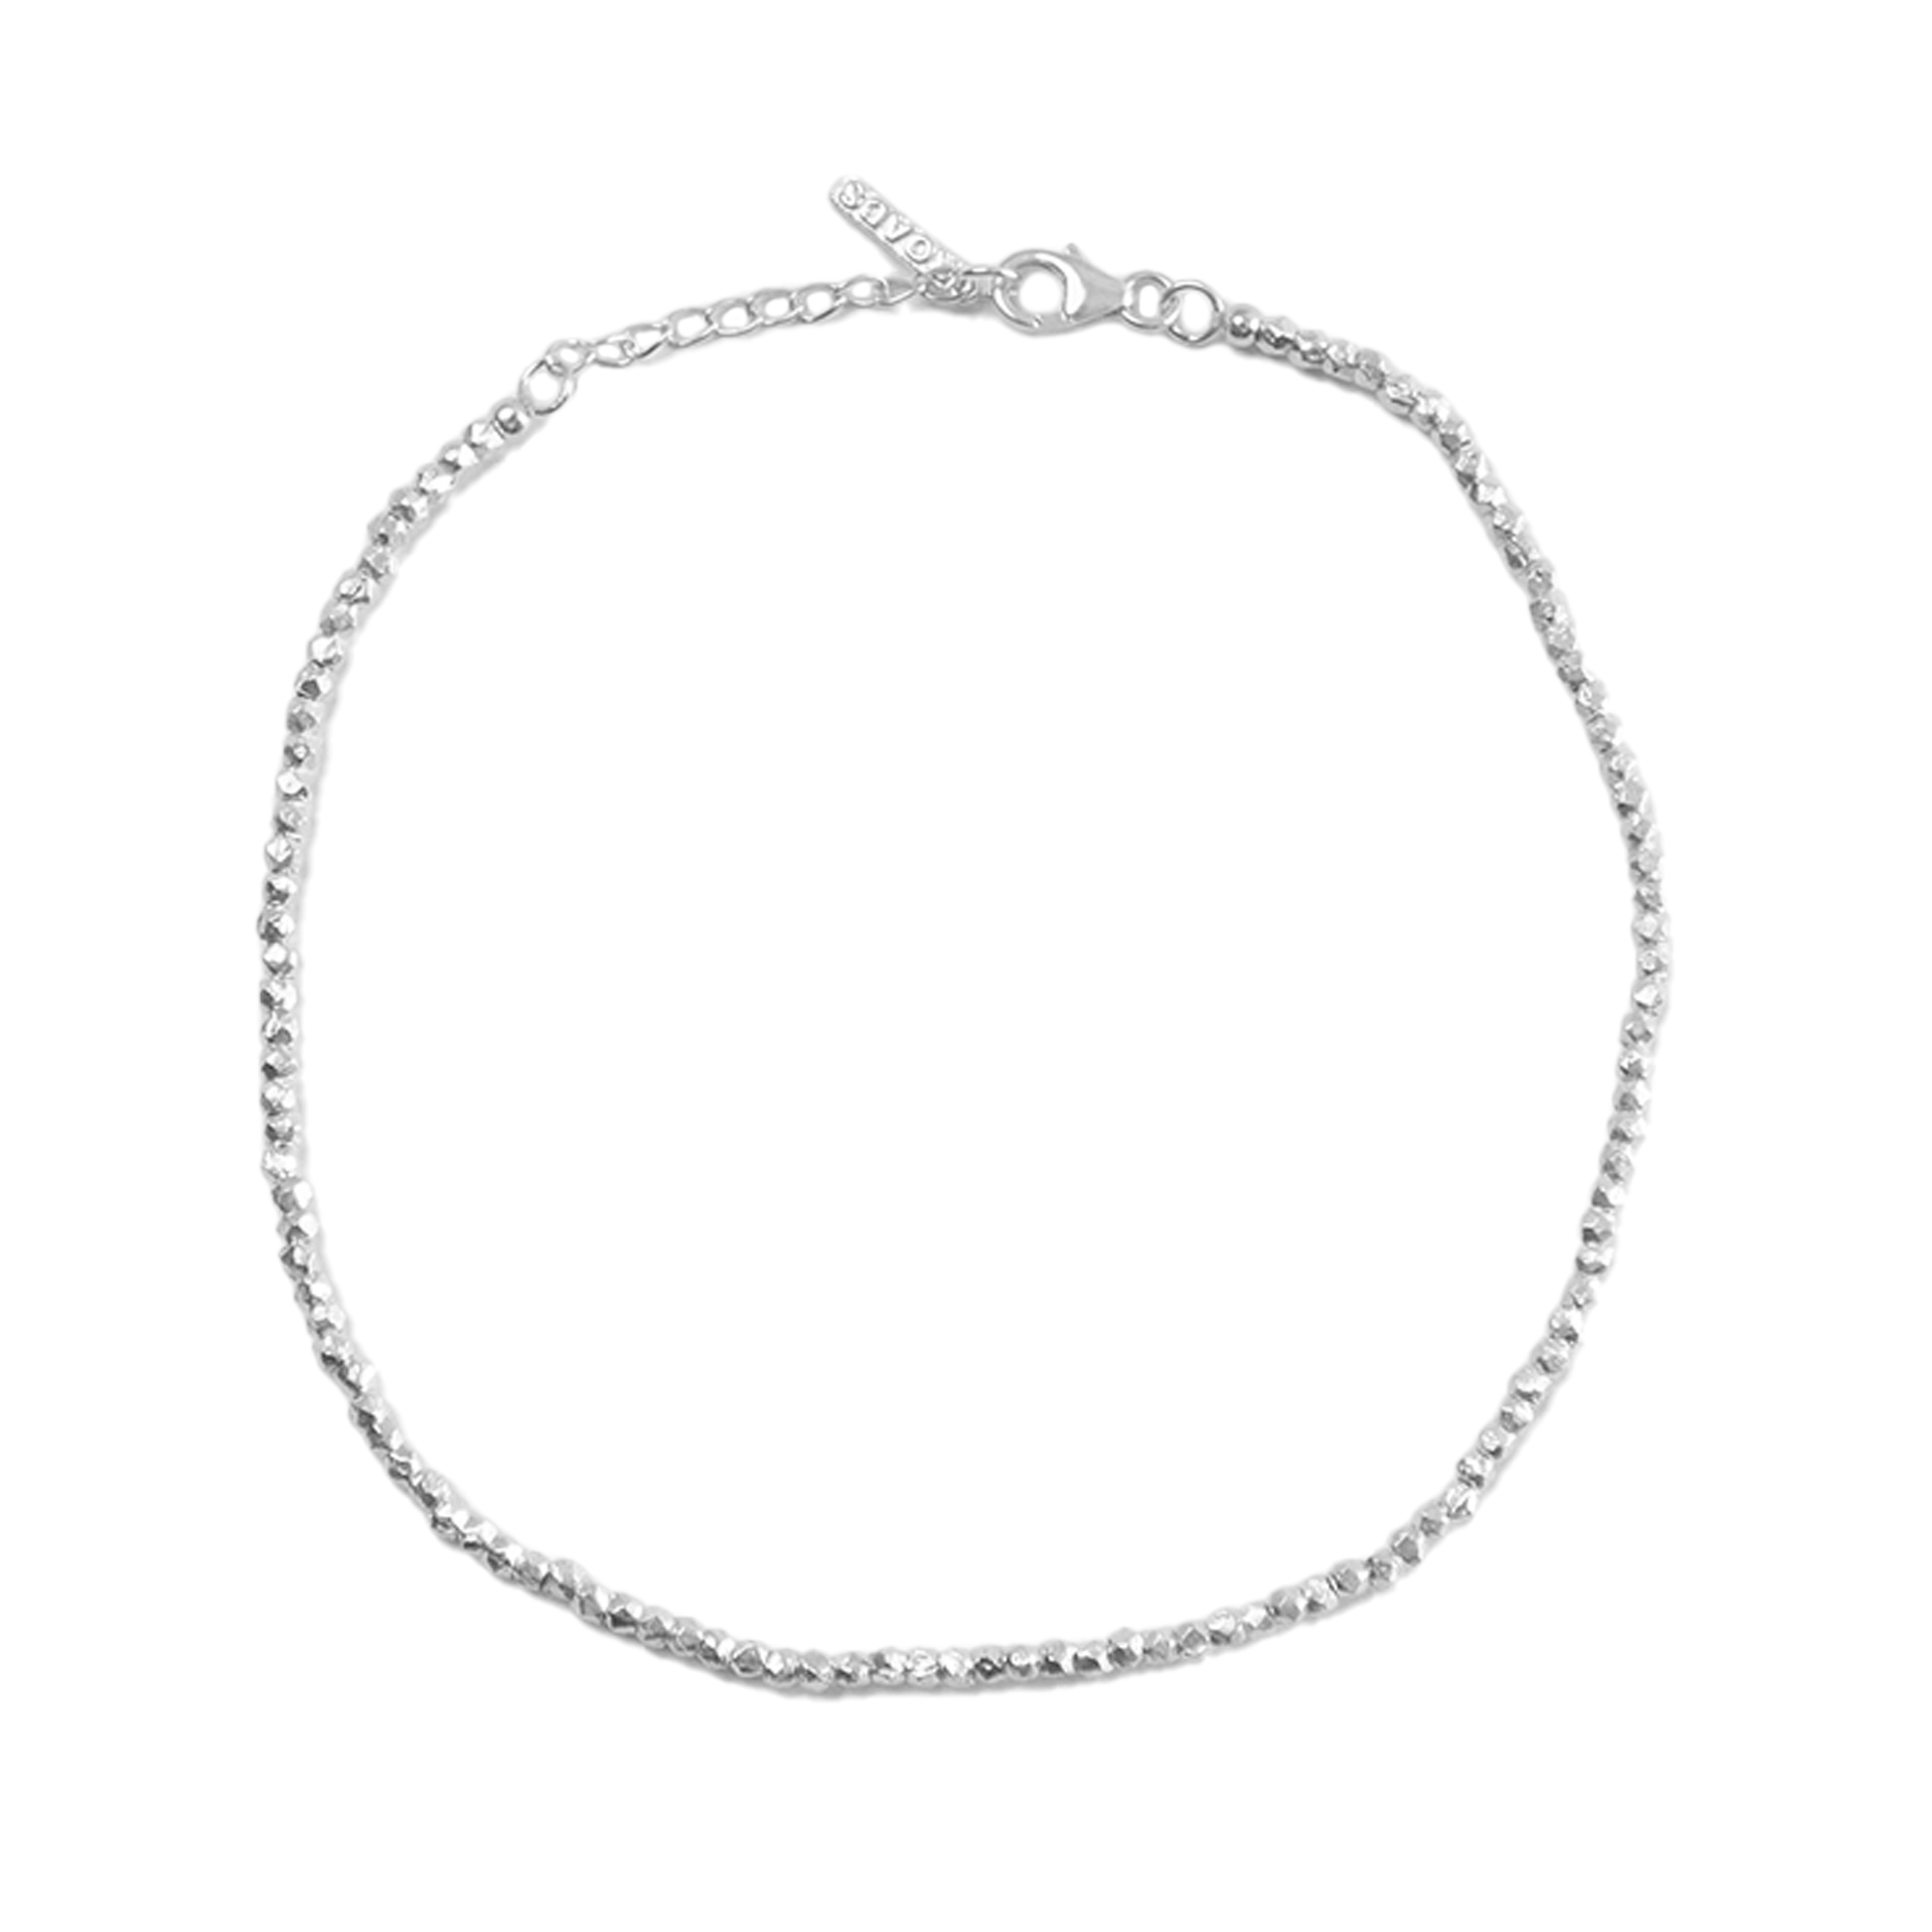 THE CECILIA NUGGET ANKLET